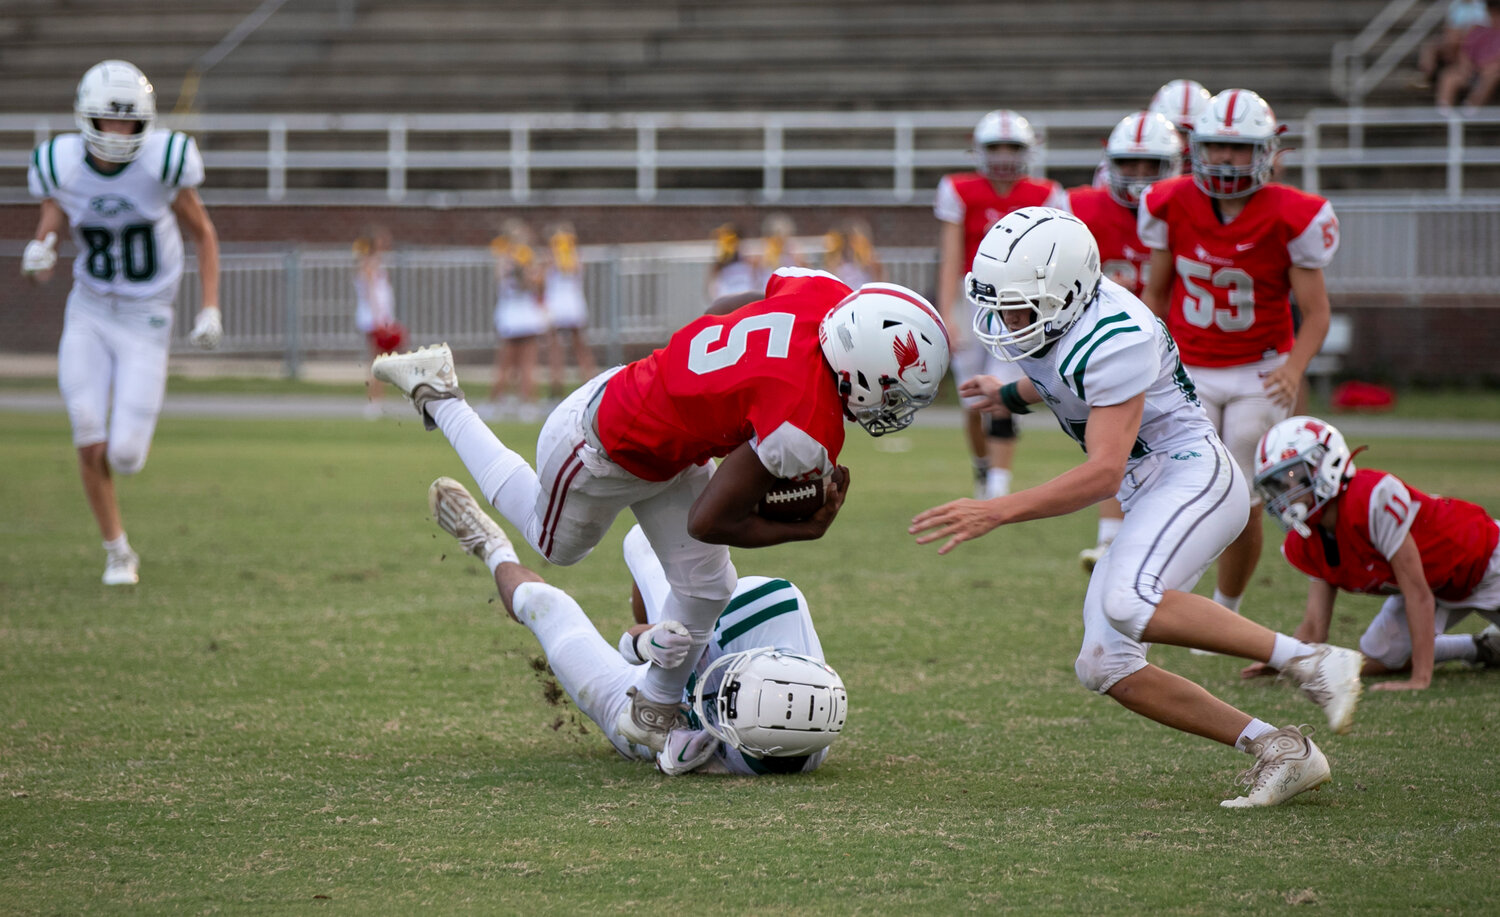 Bayshore Christian sophomore Andrew Hope (5) and junior Cyrus Dorsey (20) team up for a tackle of a St. Michael ballcarrier in the first half of action between the Eagles and Cardinals at Fairhope Municipal Stadium.